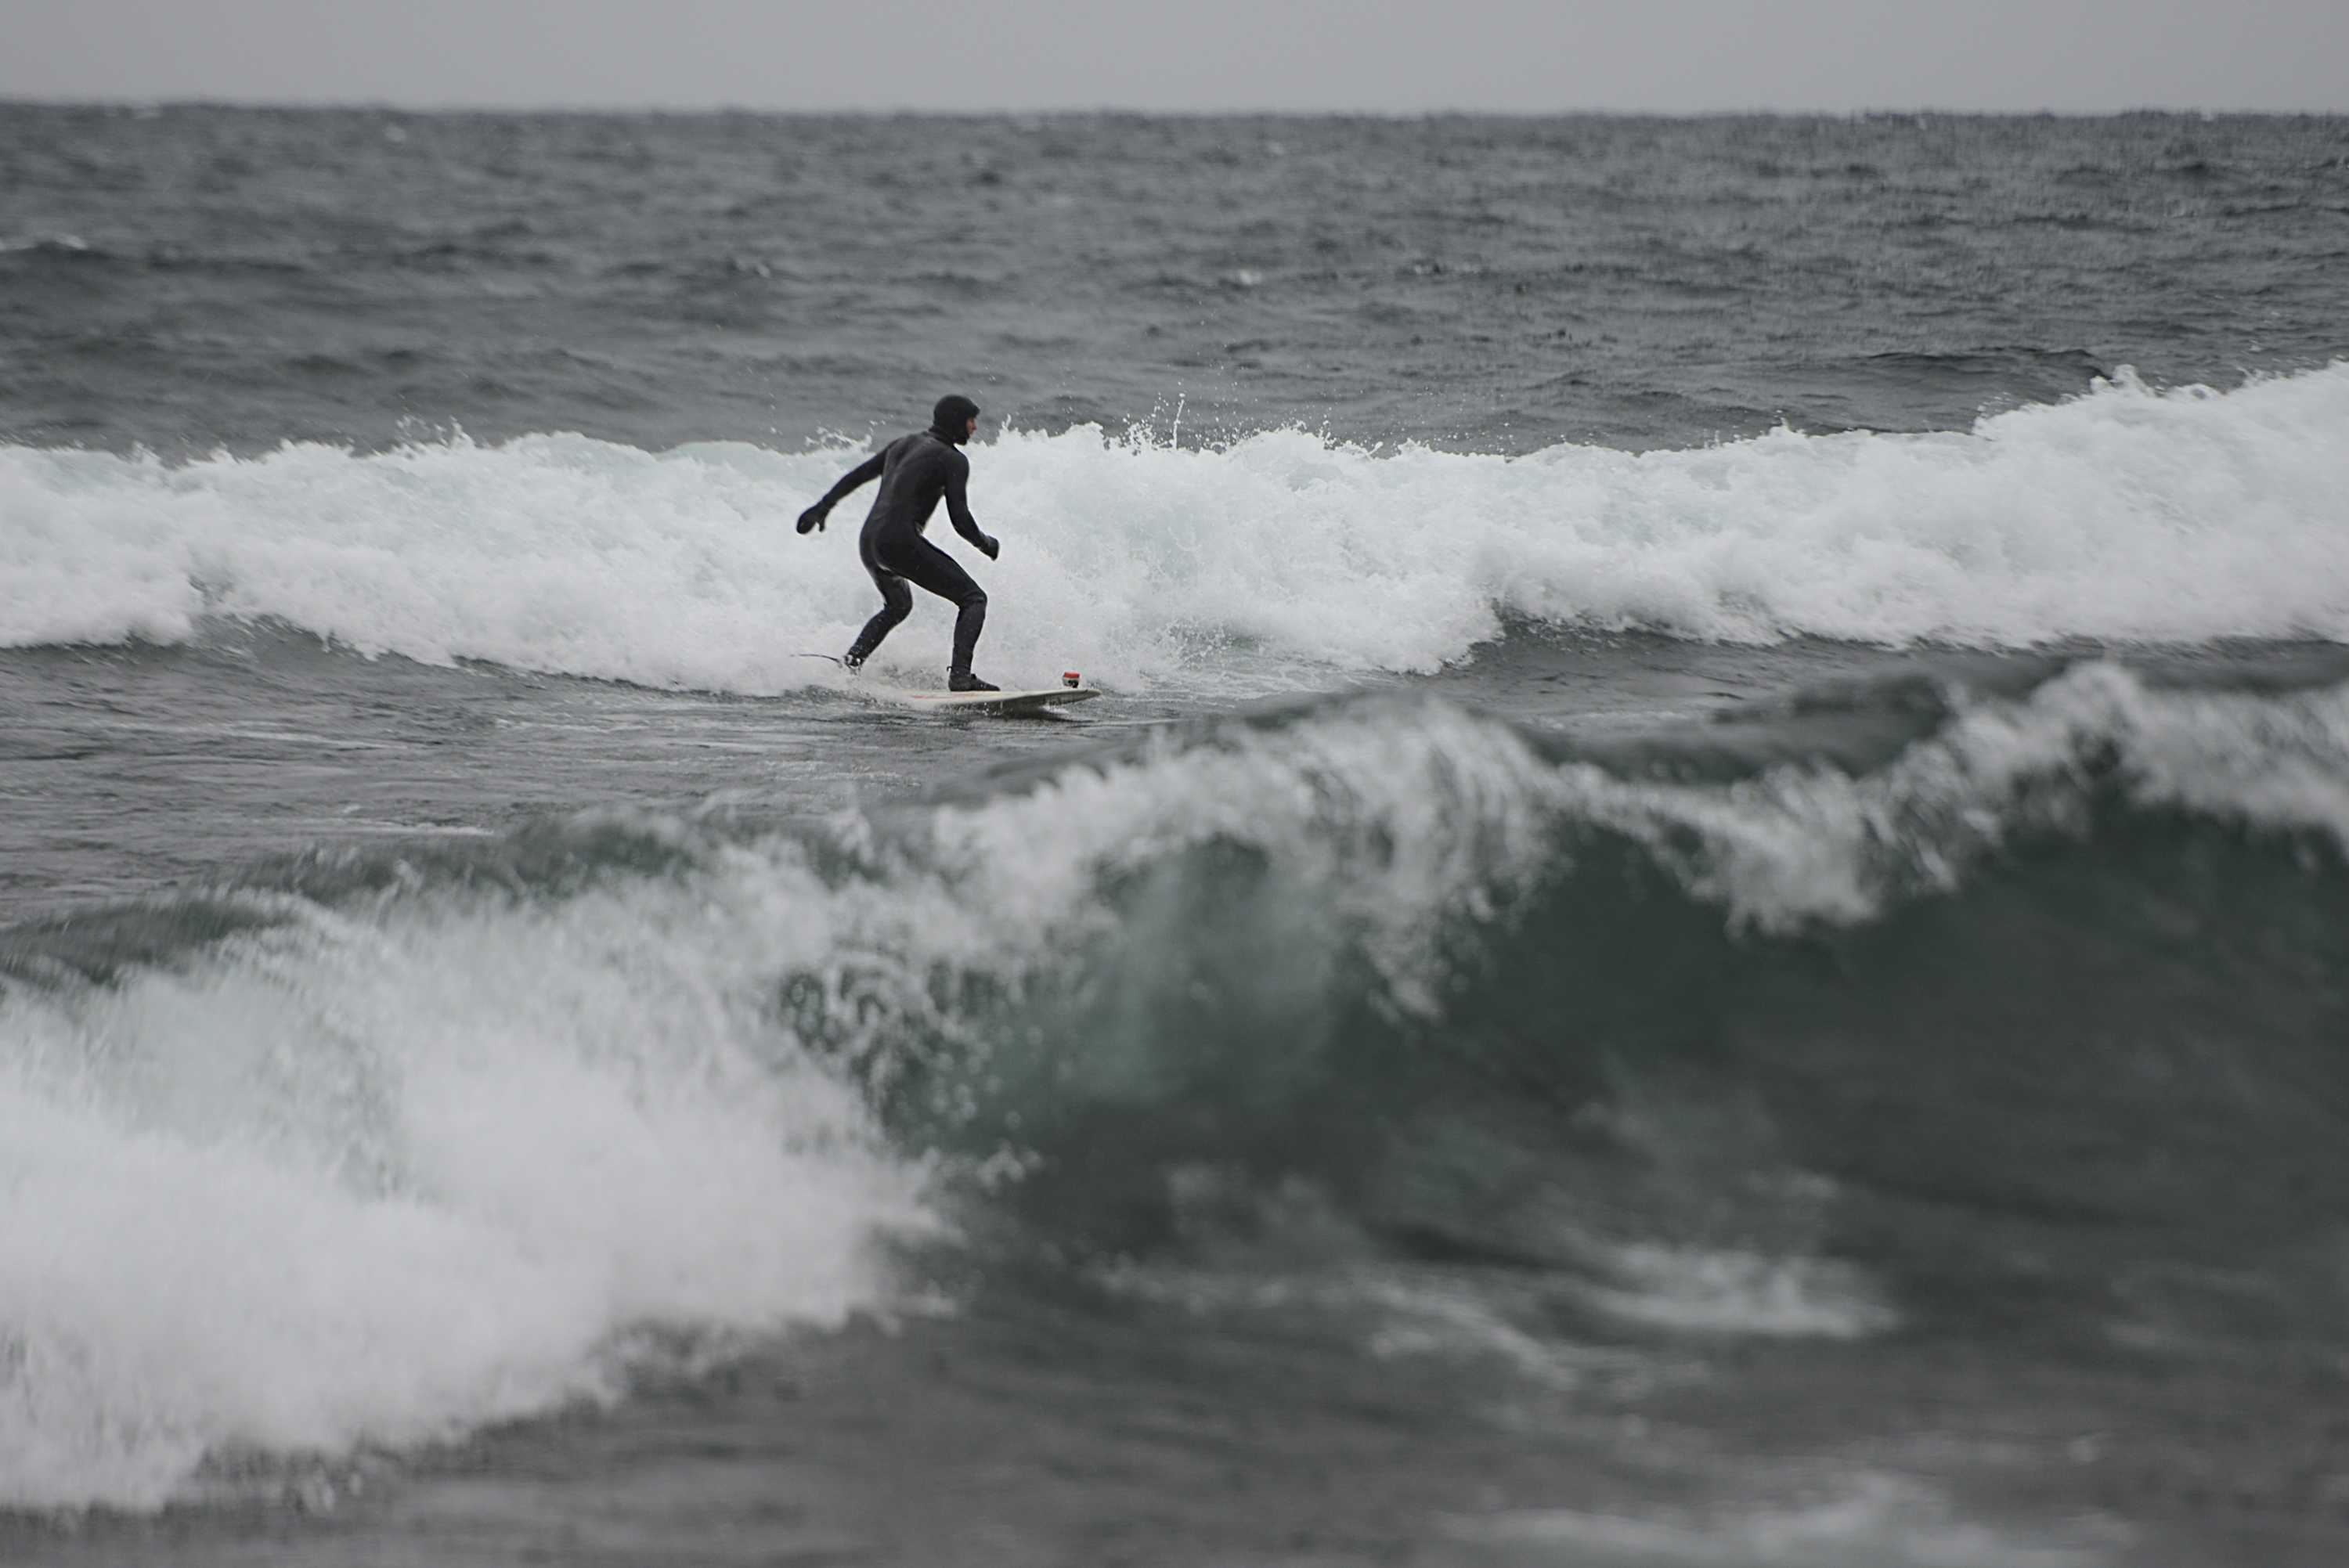 Xtreme Weekly reporter predicts killer waves for the rest of the week. Photo courtesy of Tribune News Services.